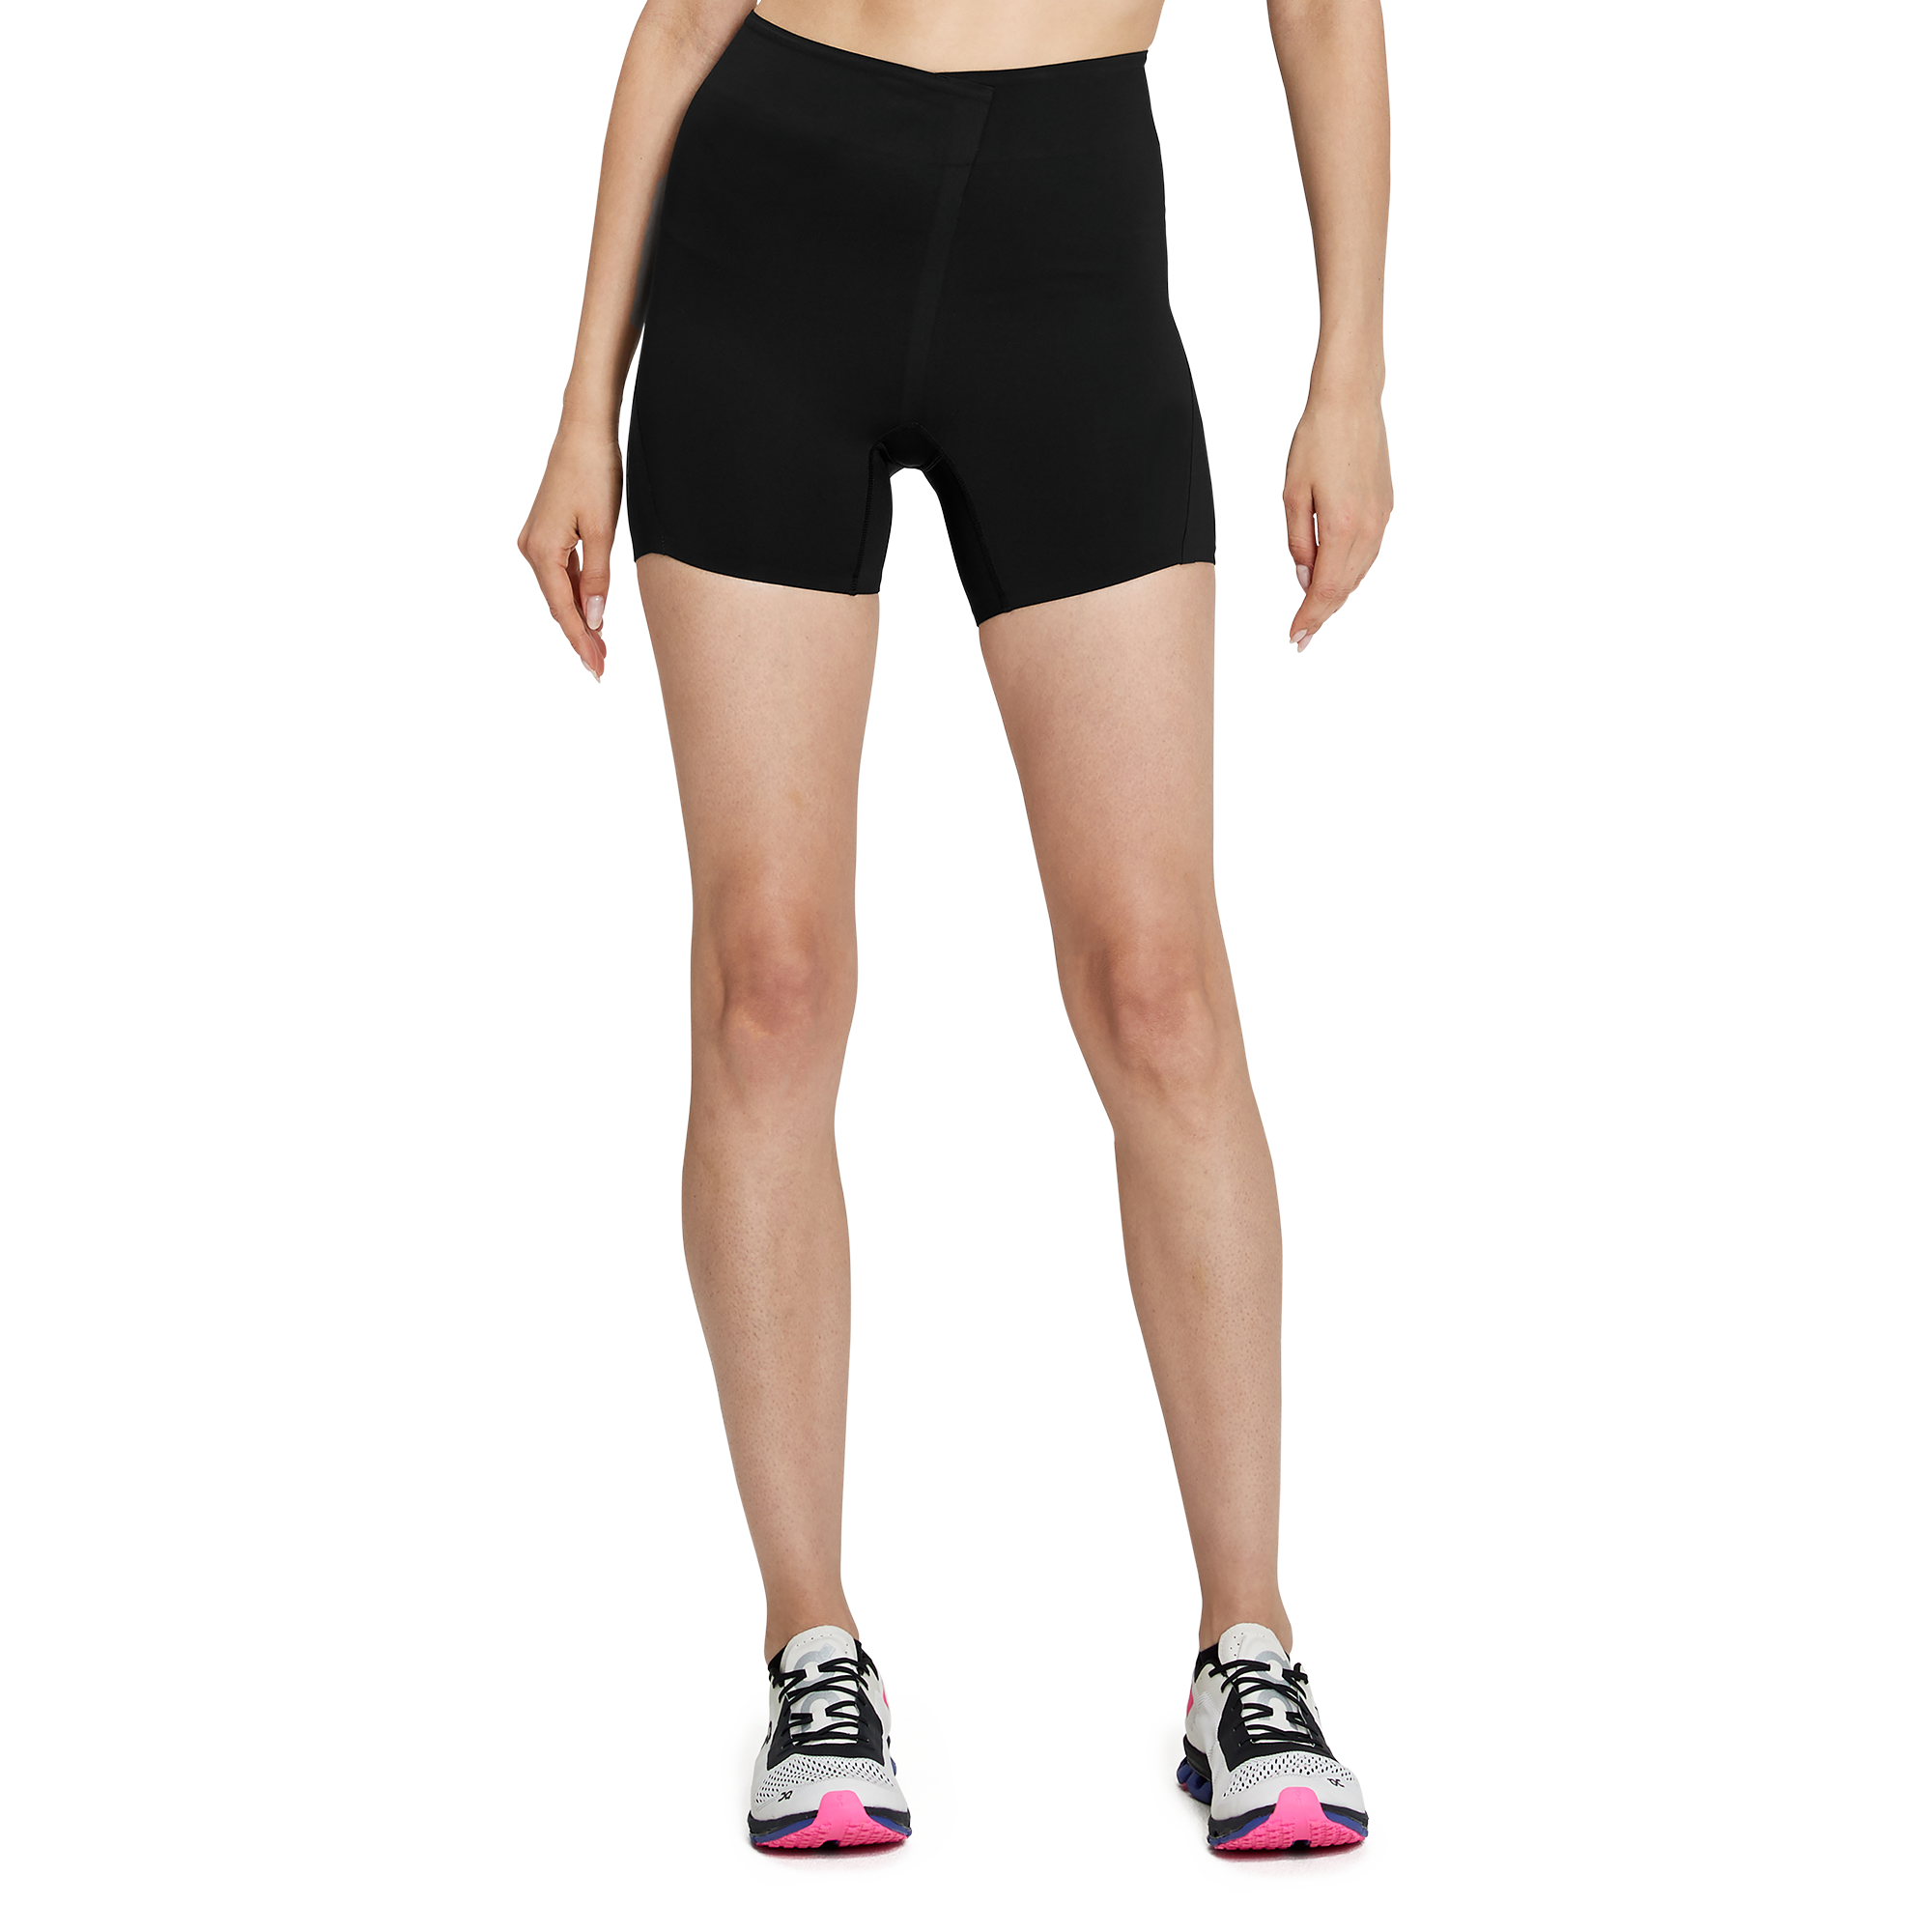 On Race Tights Womens APPAREL - Womens Tights BLACK/SHADOW